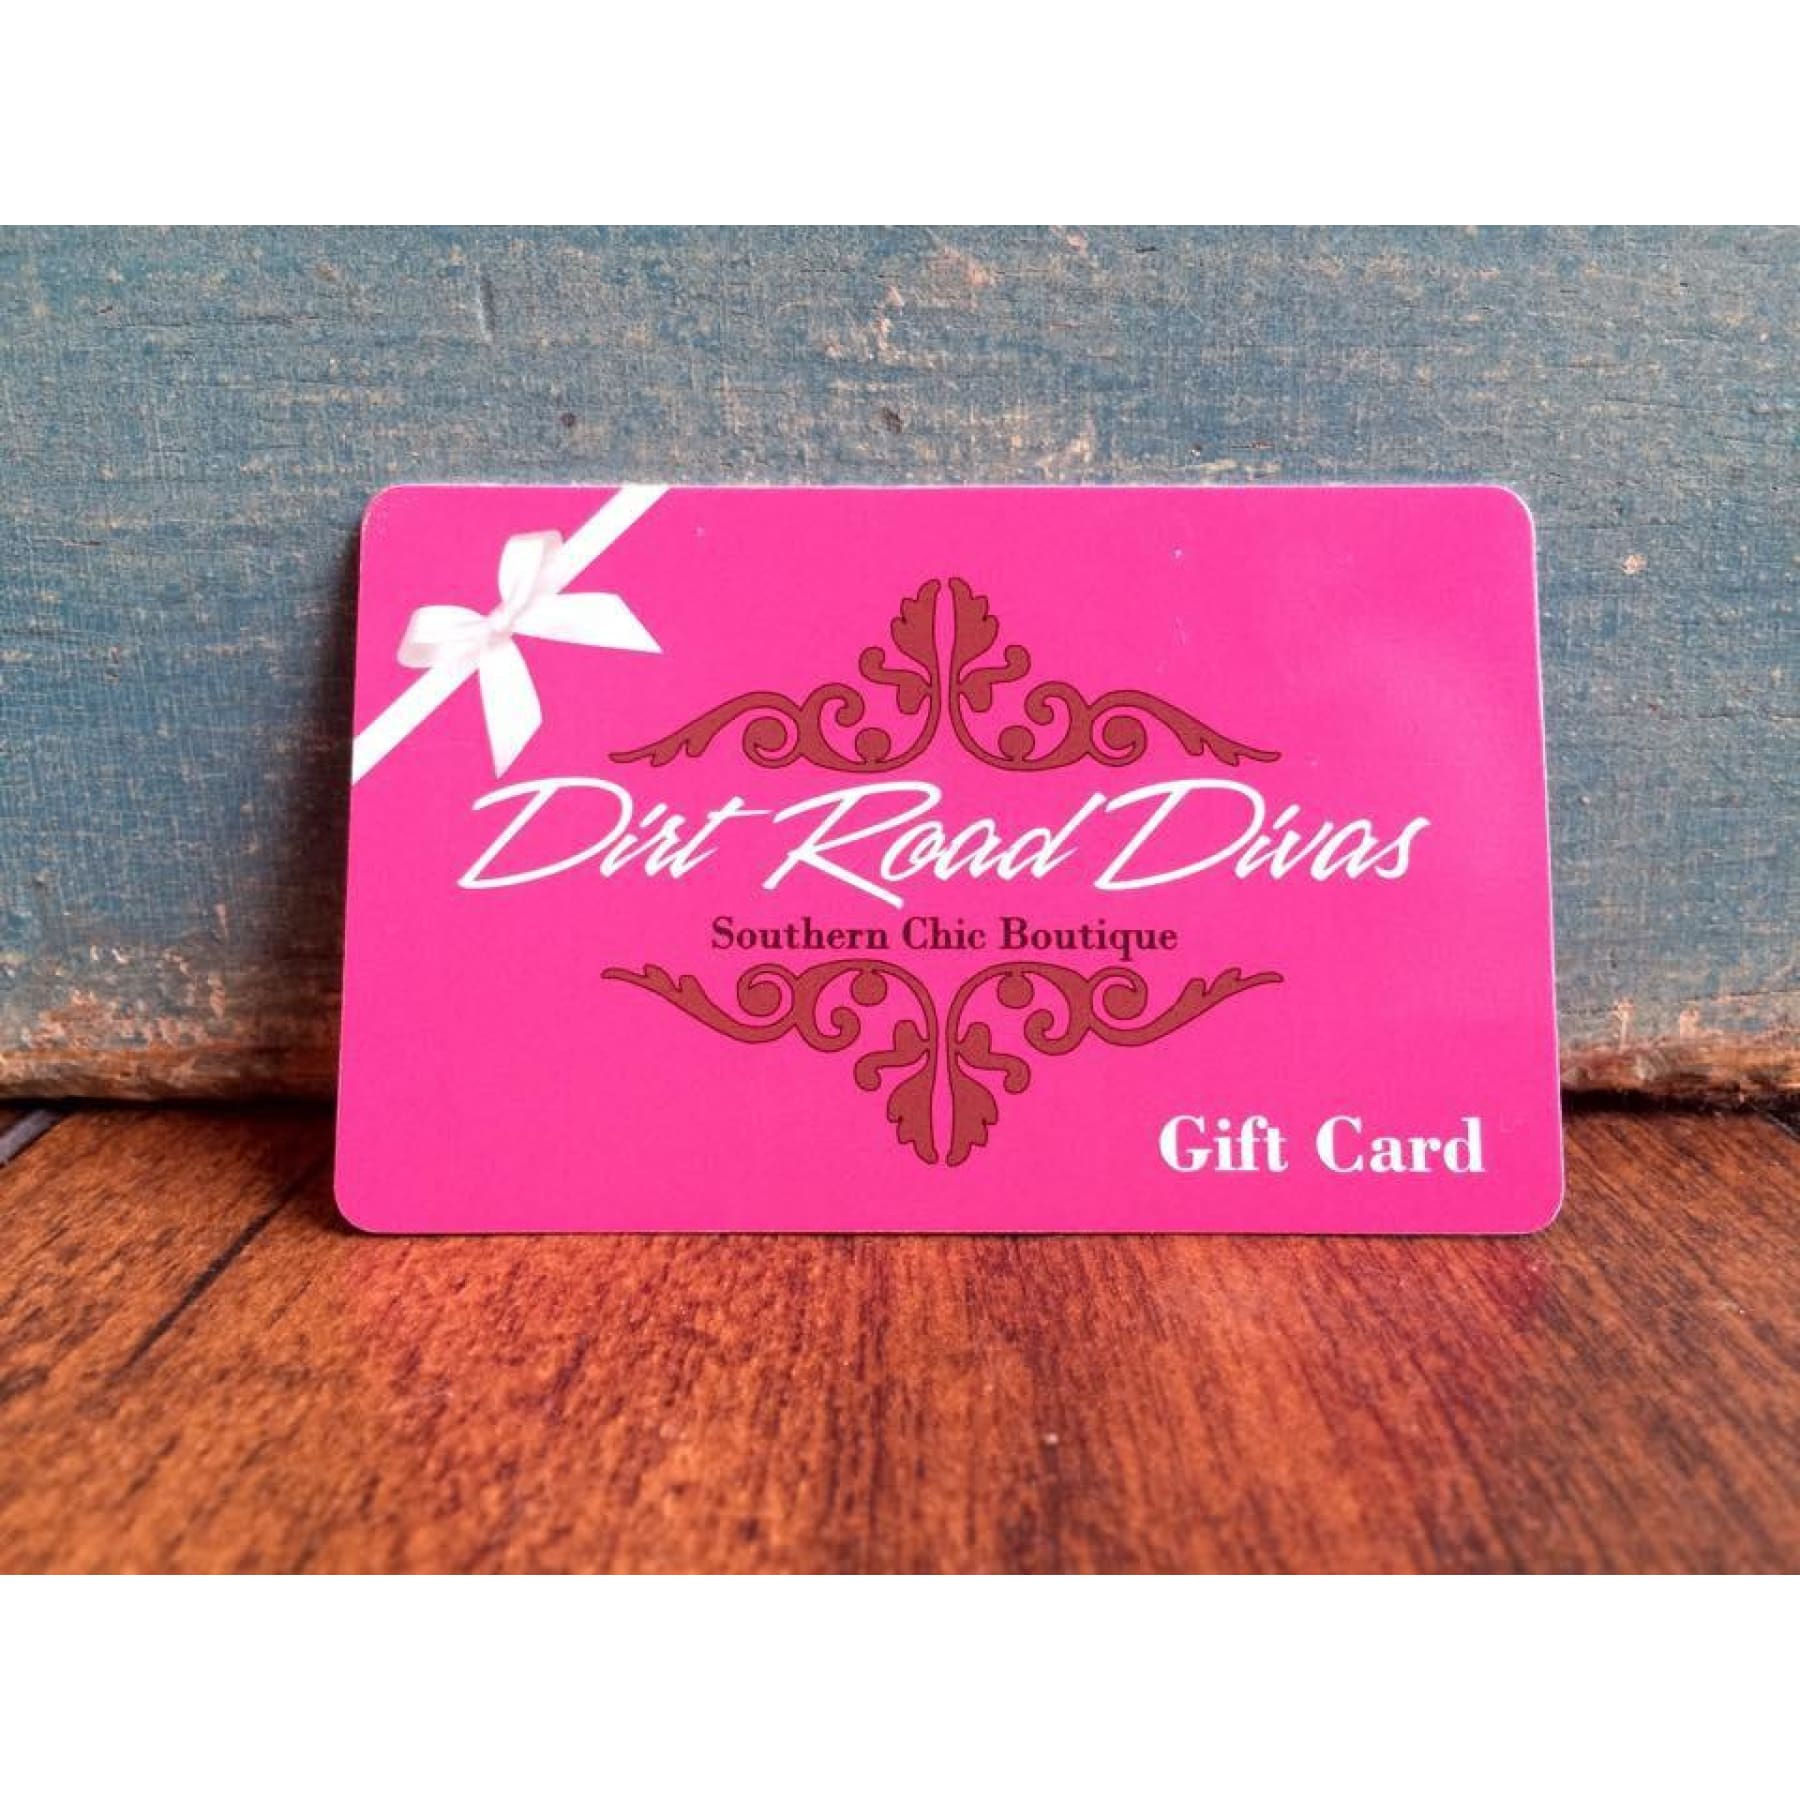 DRD Gift Card $25,Gift Card - Dirt Road Divas Boutique